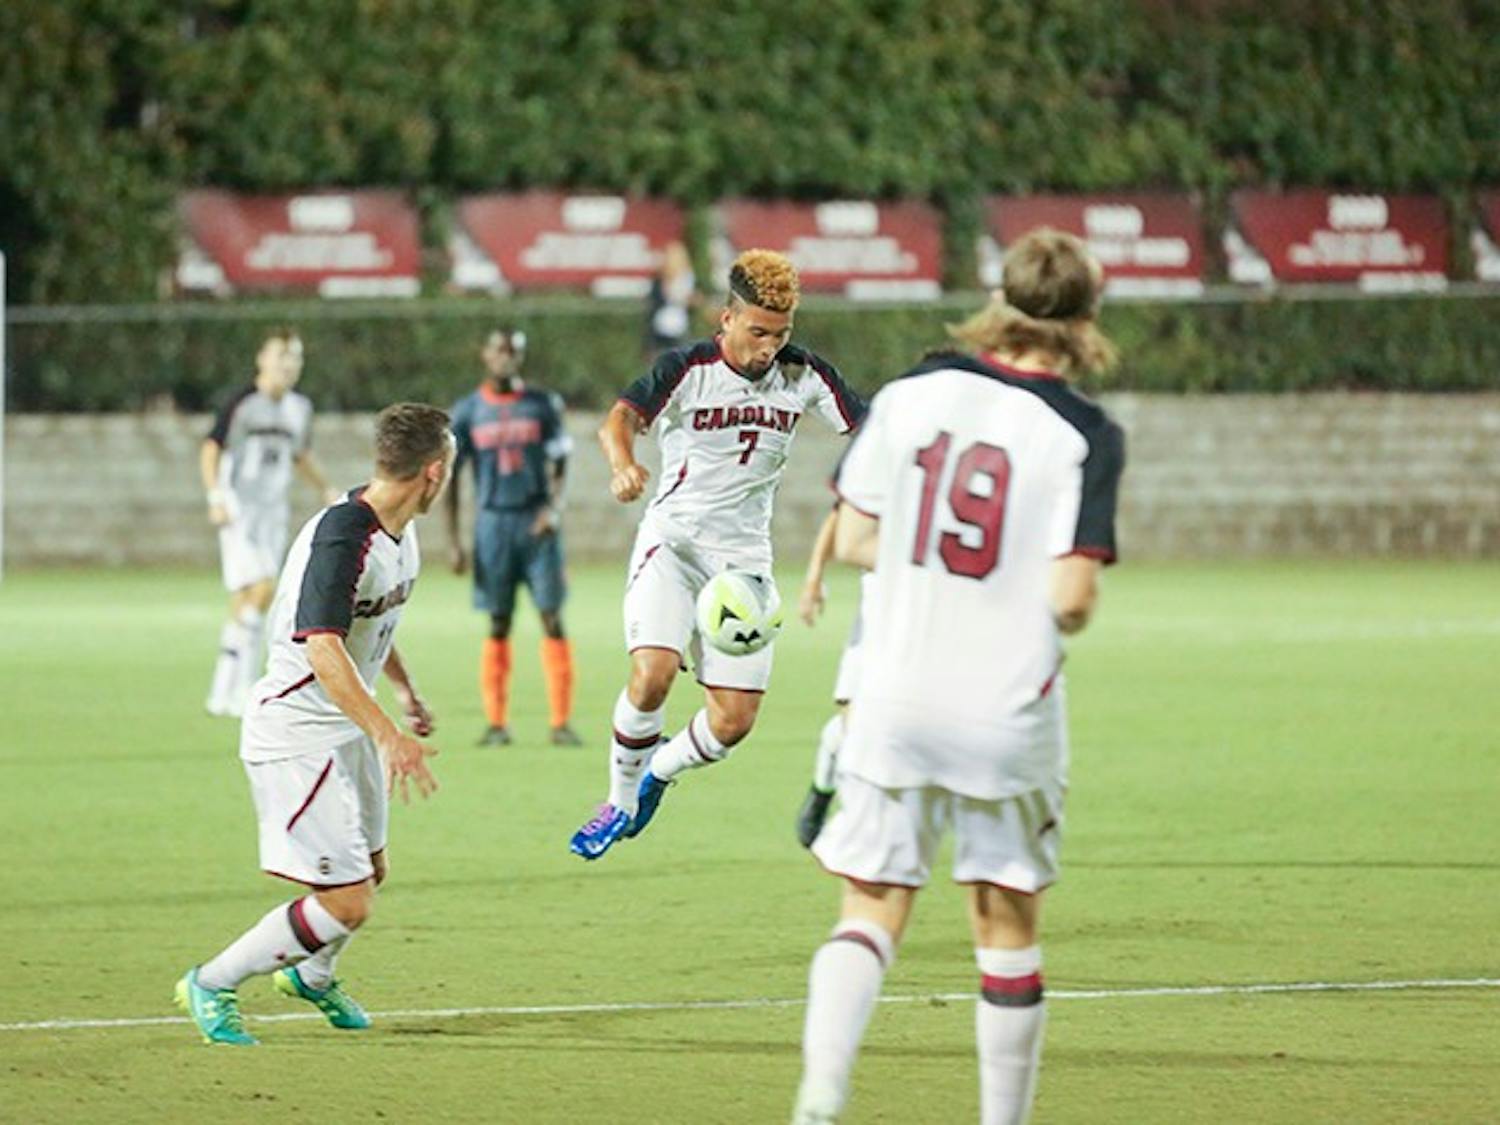 Redshirt senior Asa Kryst started the scoring for the Gamecocks in the 89th second for one of the three goals in the win against Old Dominion.